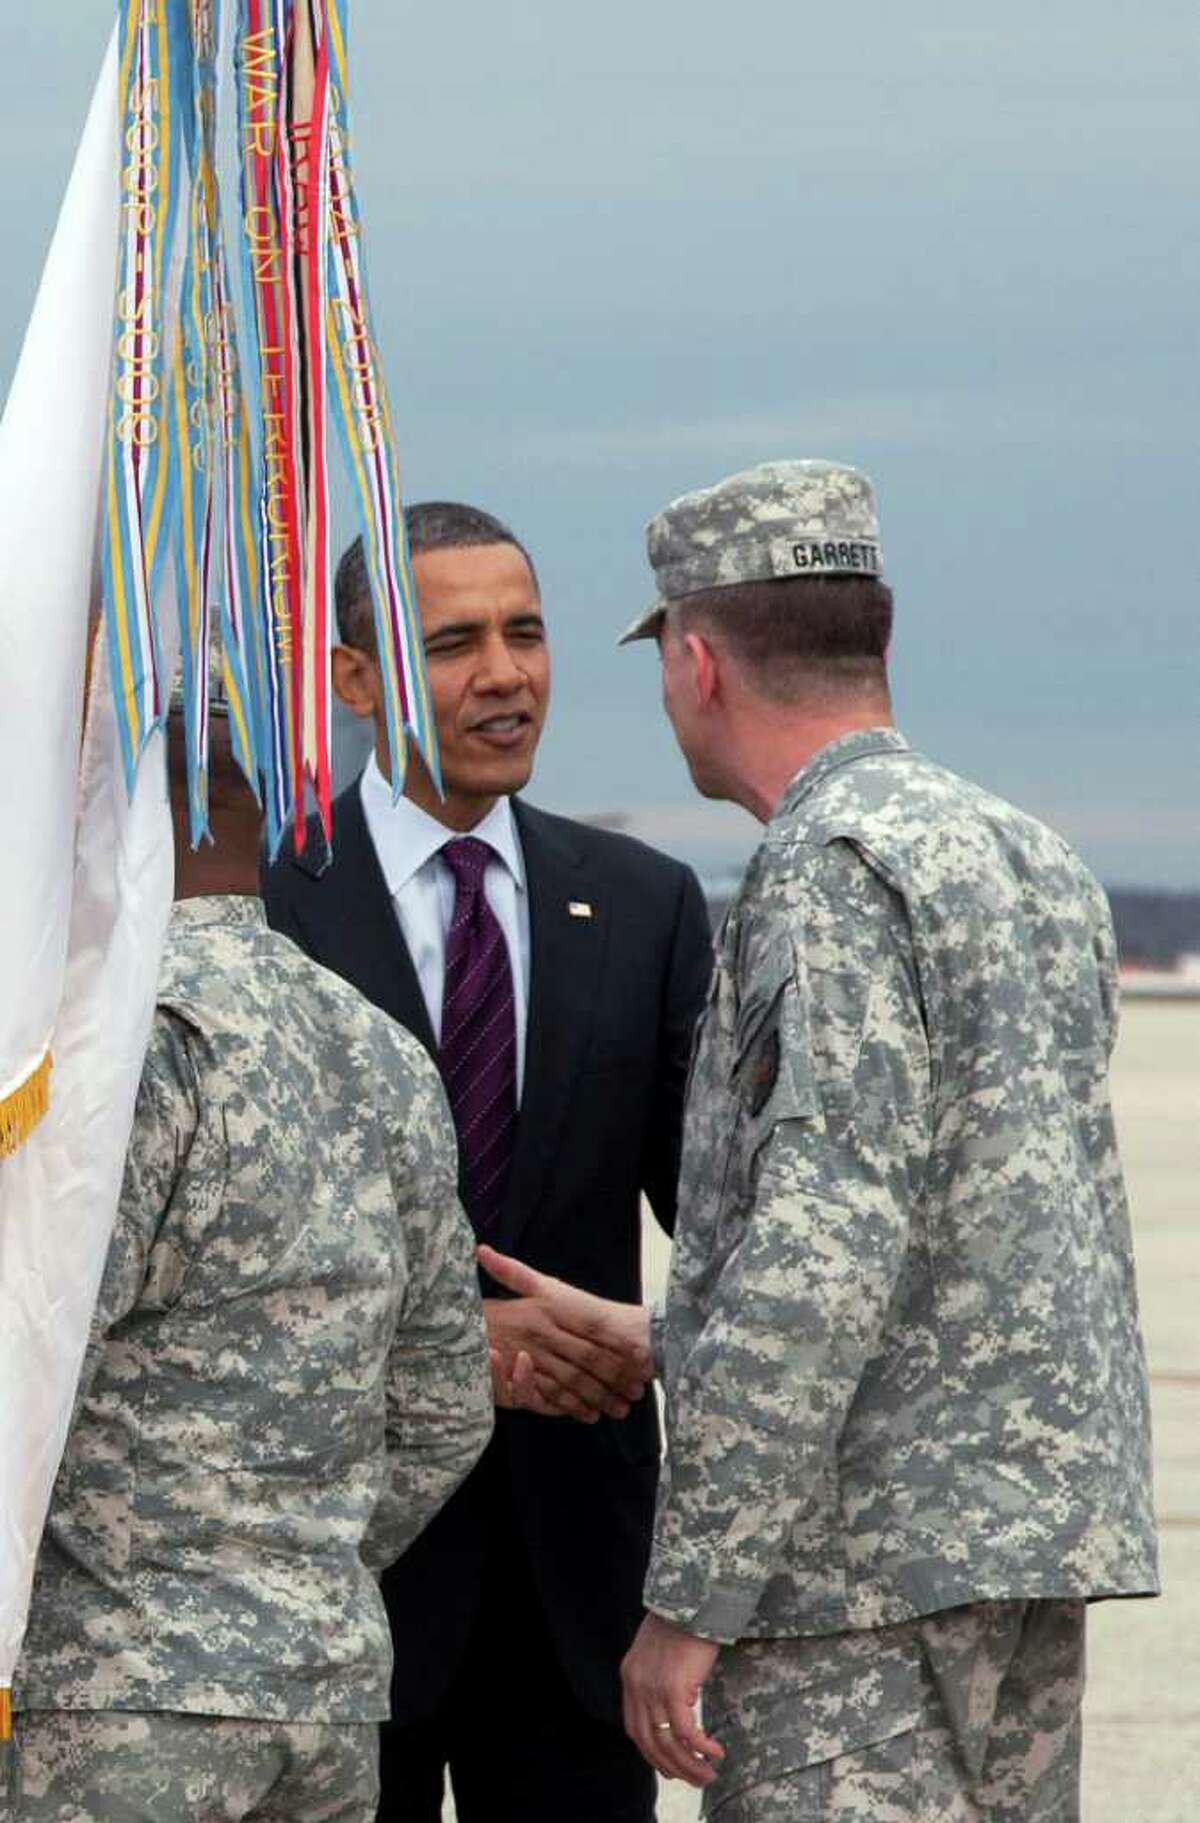 CAROLYN KASTER: ASSOCIATED PRESS WELCOME HOME: President Barack Obama greets troops Tuesday as they step off a plane at Andrews Air Force Base, Md., during a ceremony marking the return of the United States Forces' Iraq Colors, visible in foreground at left.